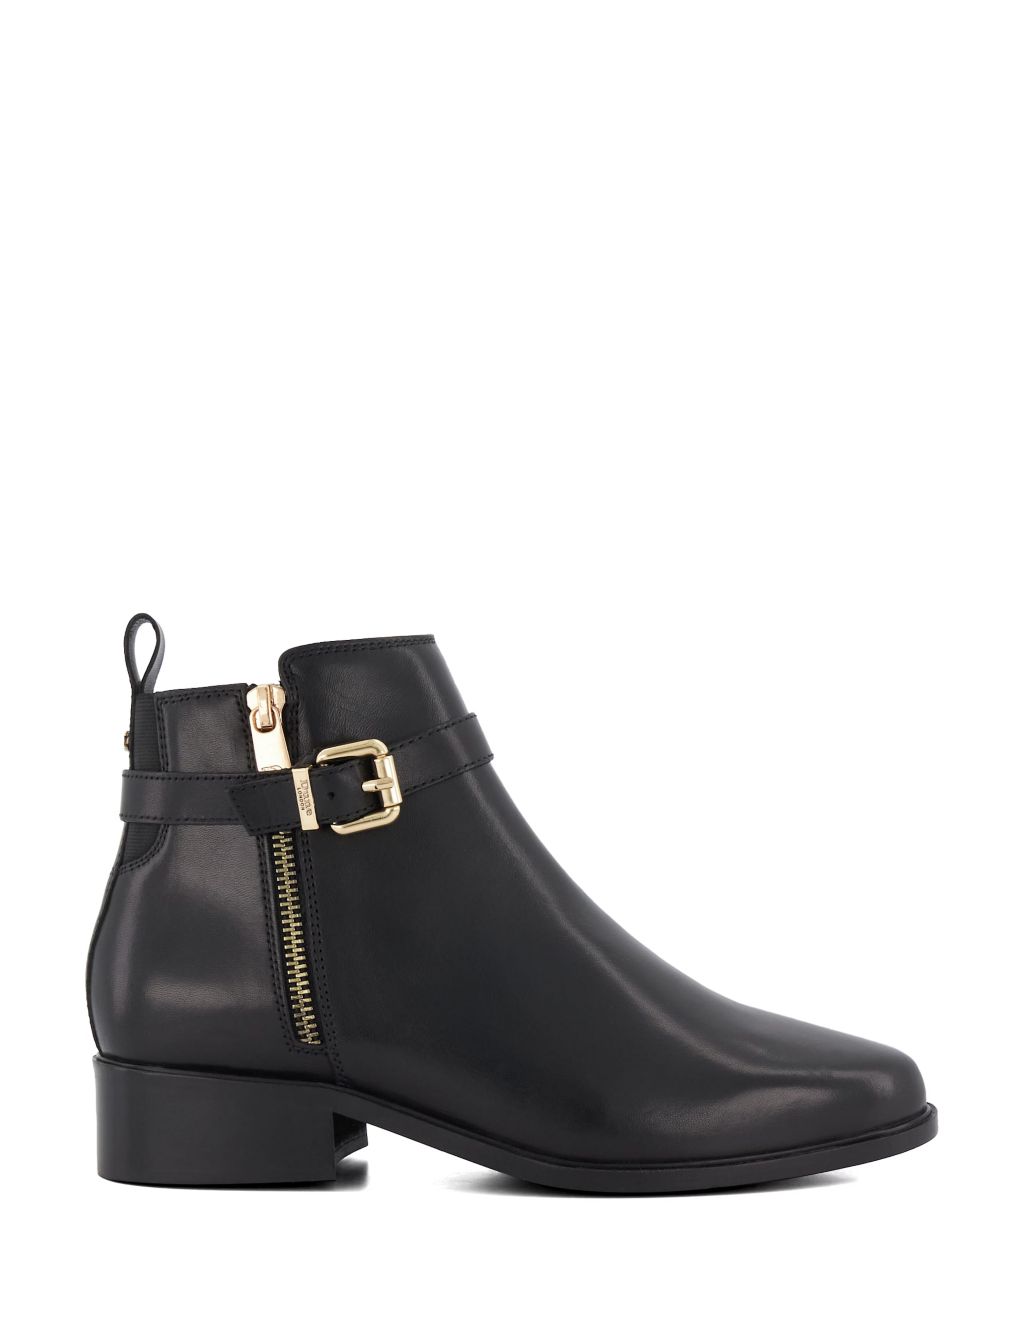 Wide Fit Leather Block Heel Ankle Boots 3 of 5